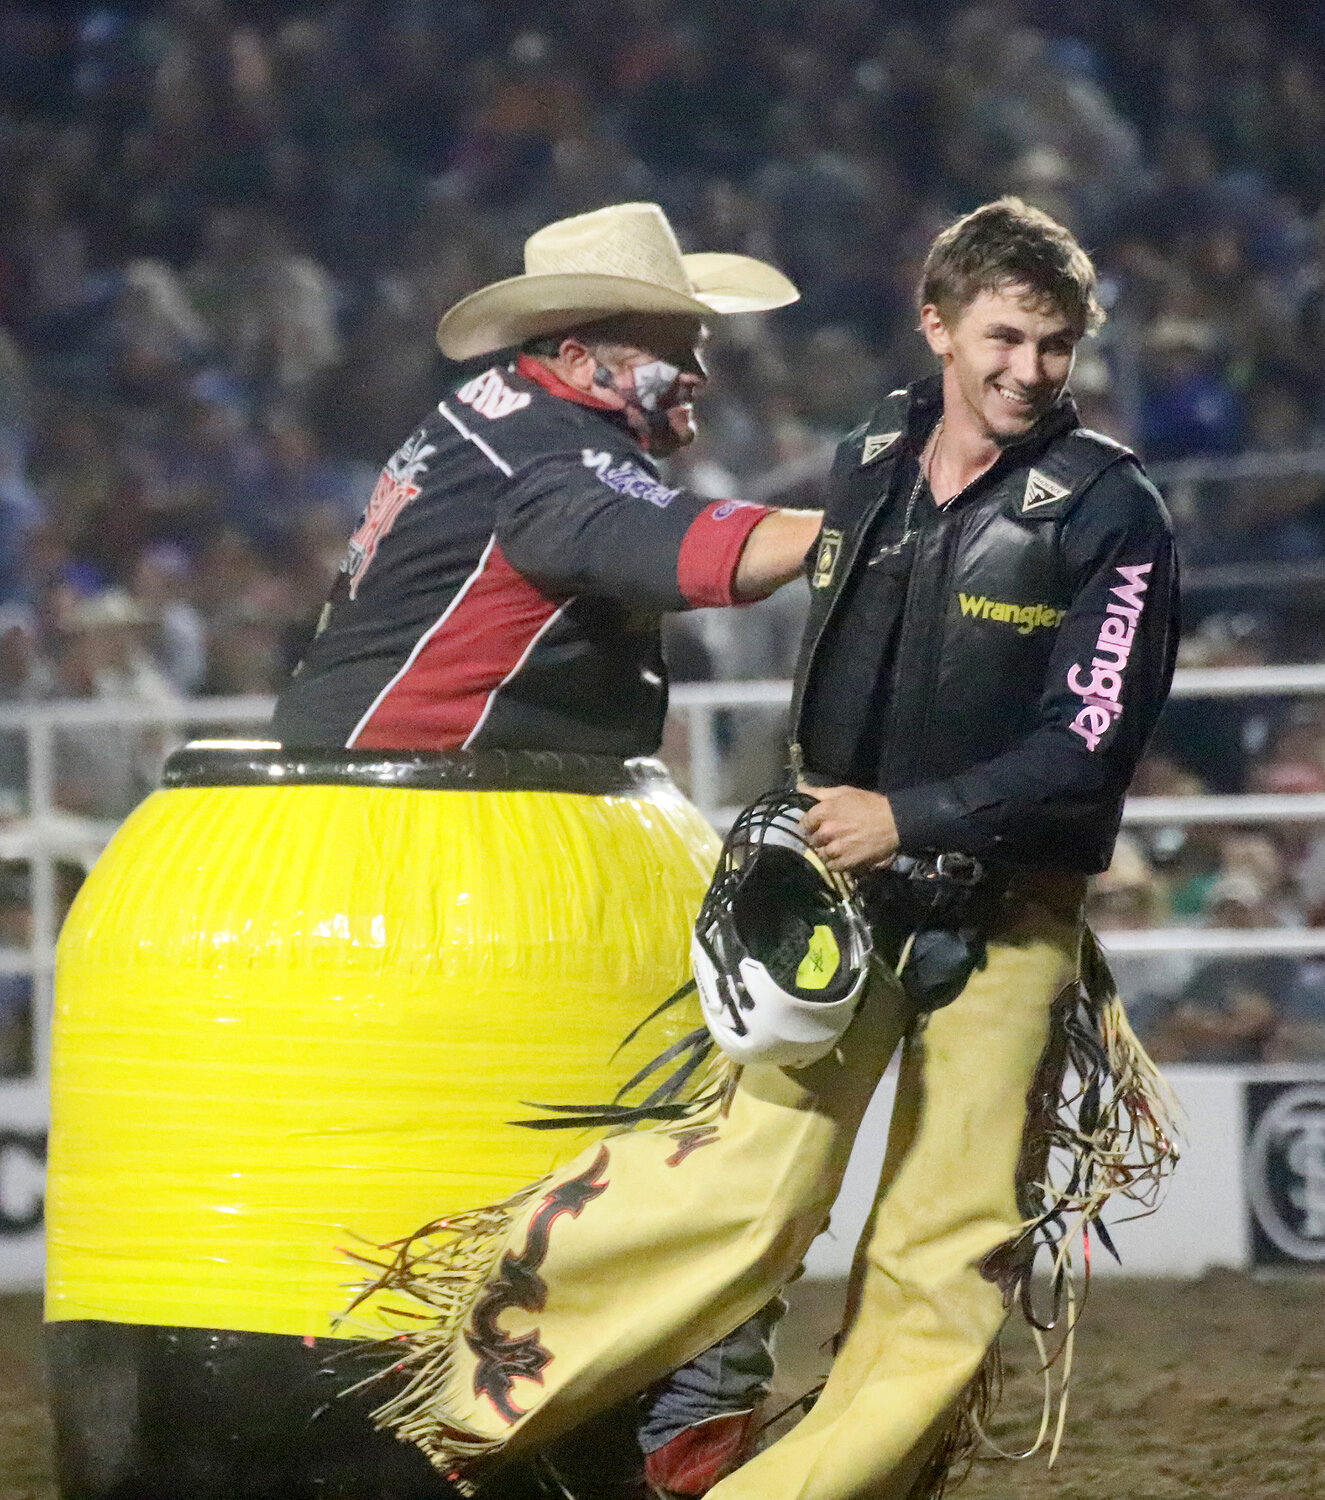 National Rodeo Clown Justin Rumford congratulates Creek Young after a wild 90.5 ride Wednesday night at the Tri-State Rodeo's Jim Baier/Dodge Ram Chute Out in Fort Madison.